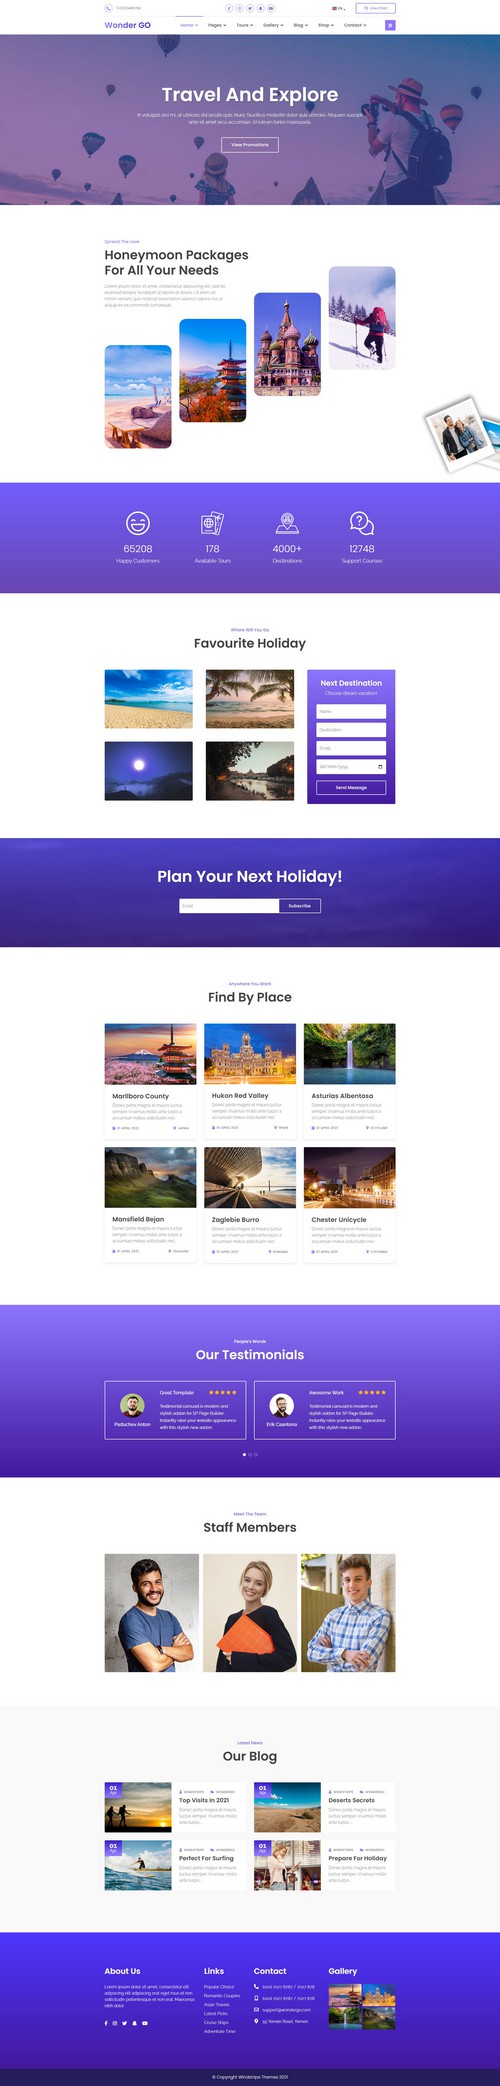 Wonder GO  - Responsive Tour Booking and Travel Joomla 4 Template